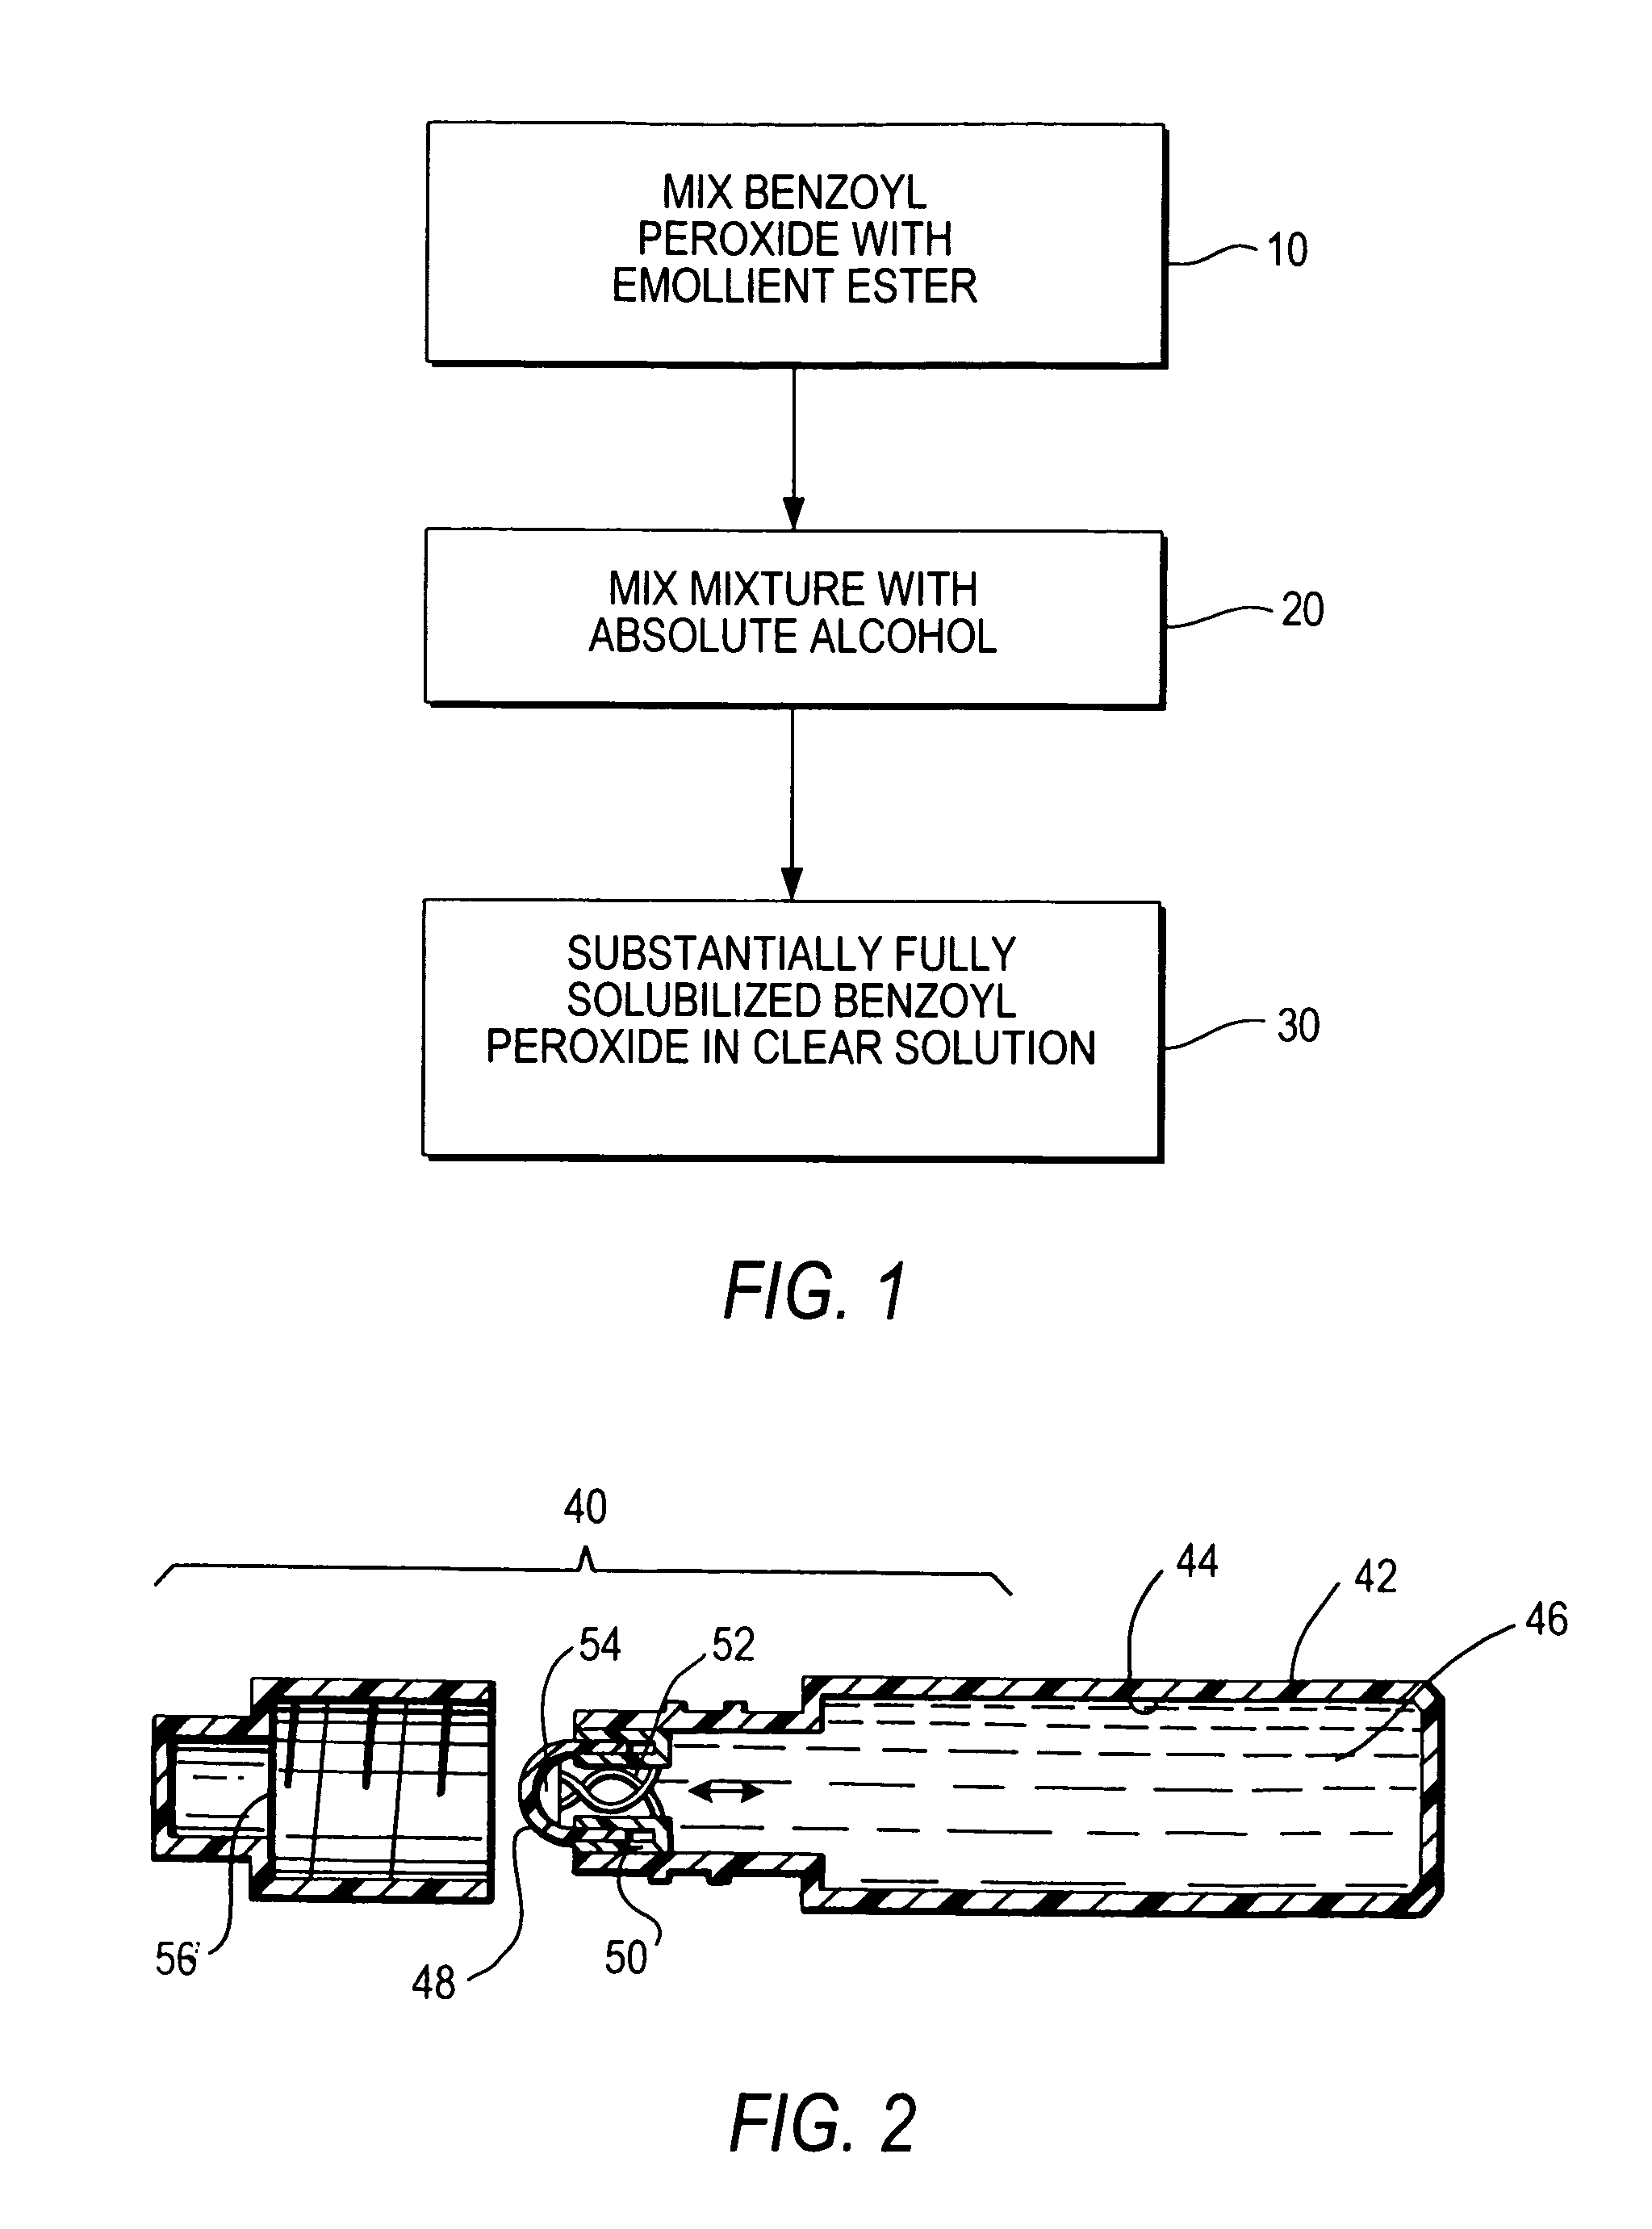 Liquid compositions containing solubilized benzoyl peroxide